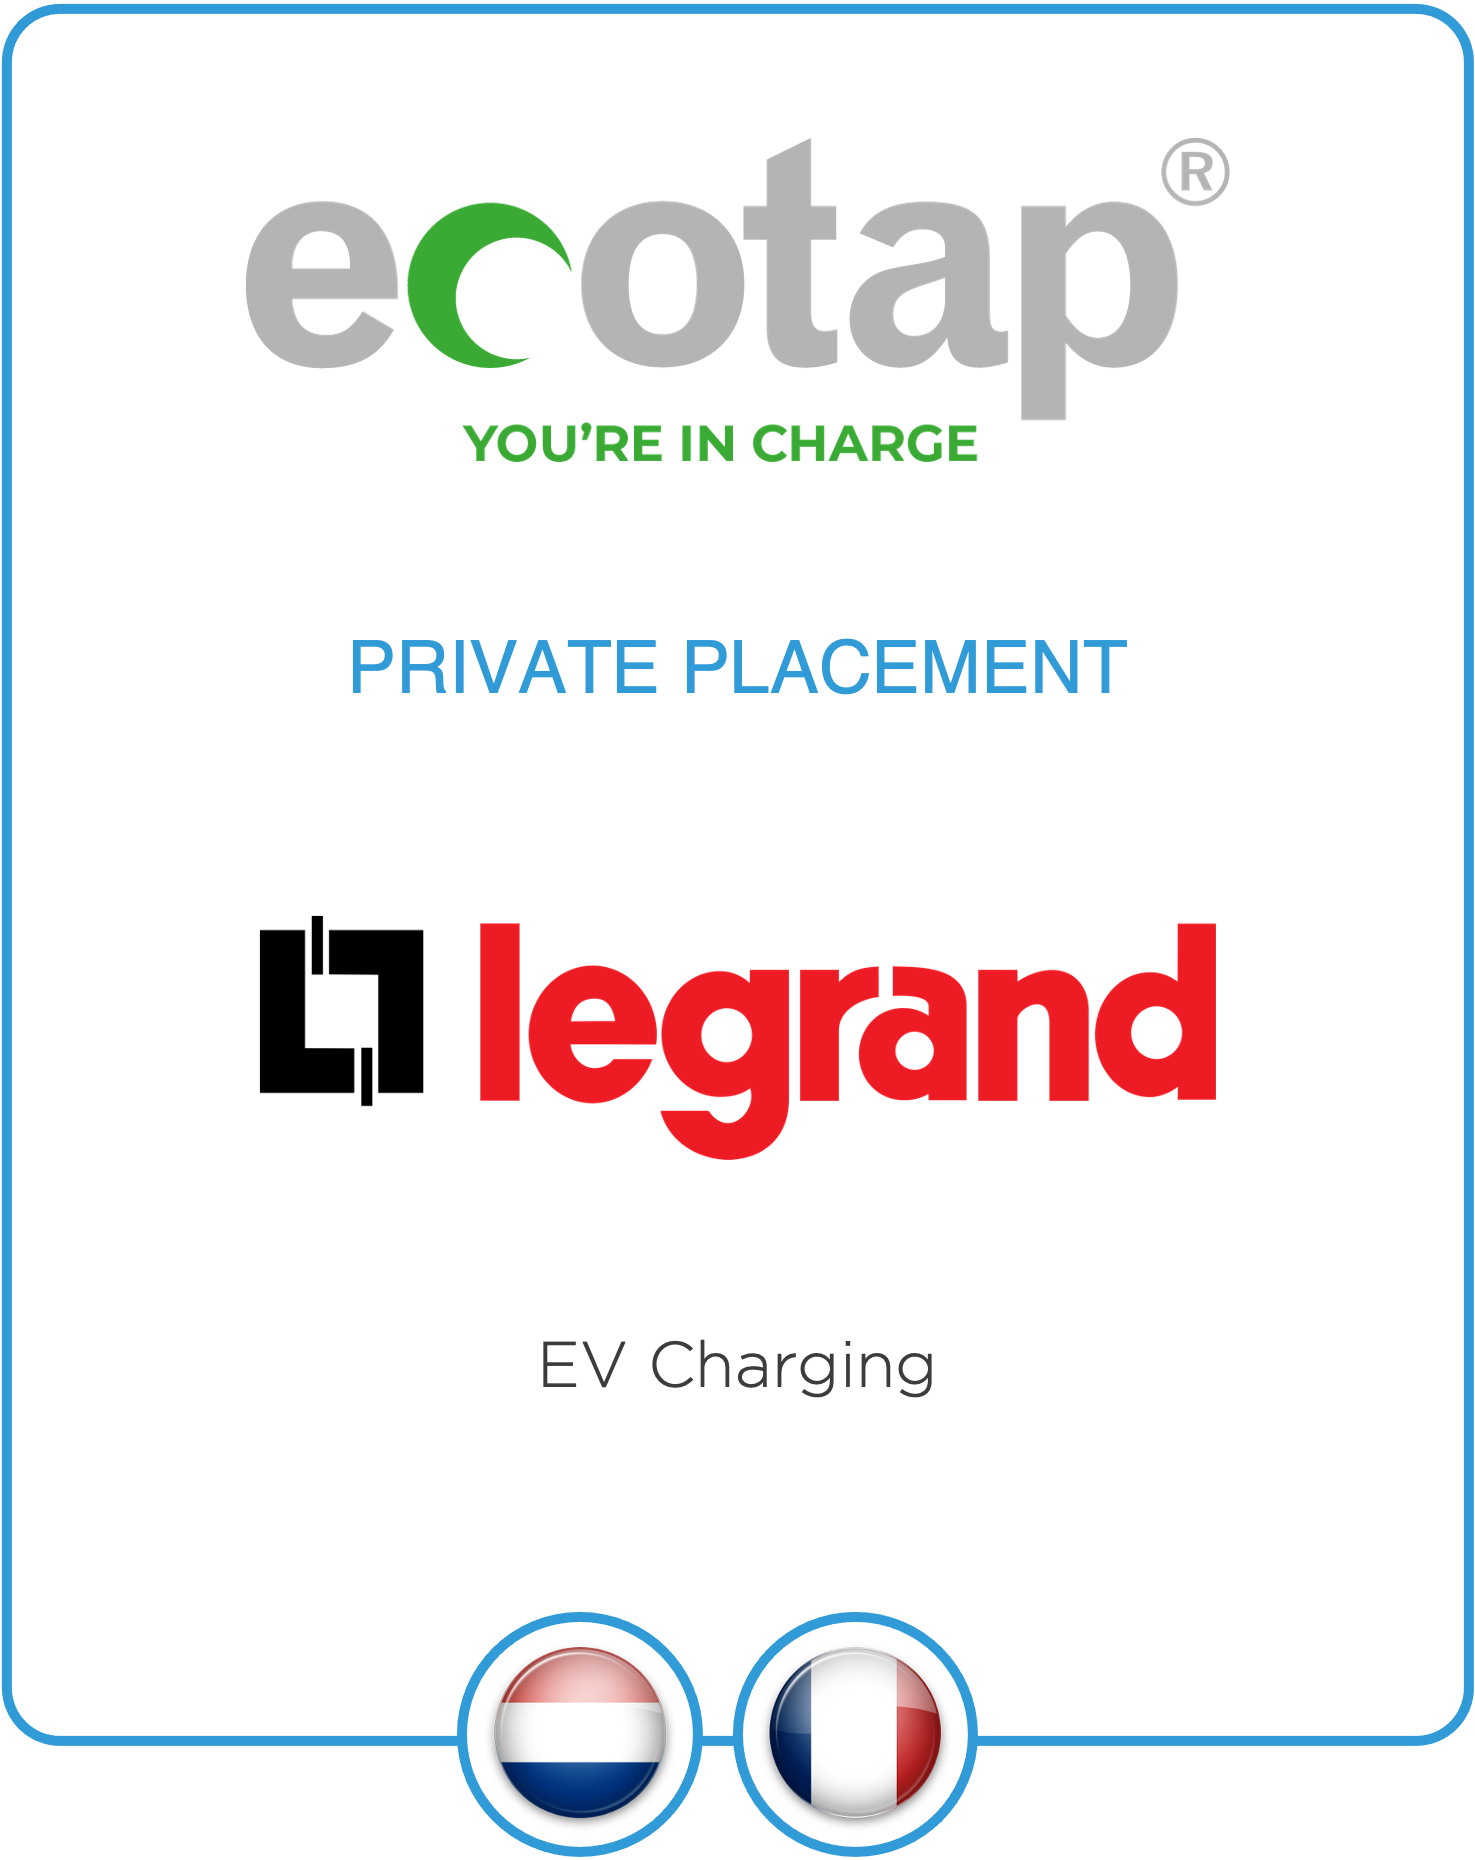 Drake Star Acts as Financial Advisor to Ecotap on its Partnership with Legrand